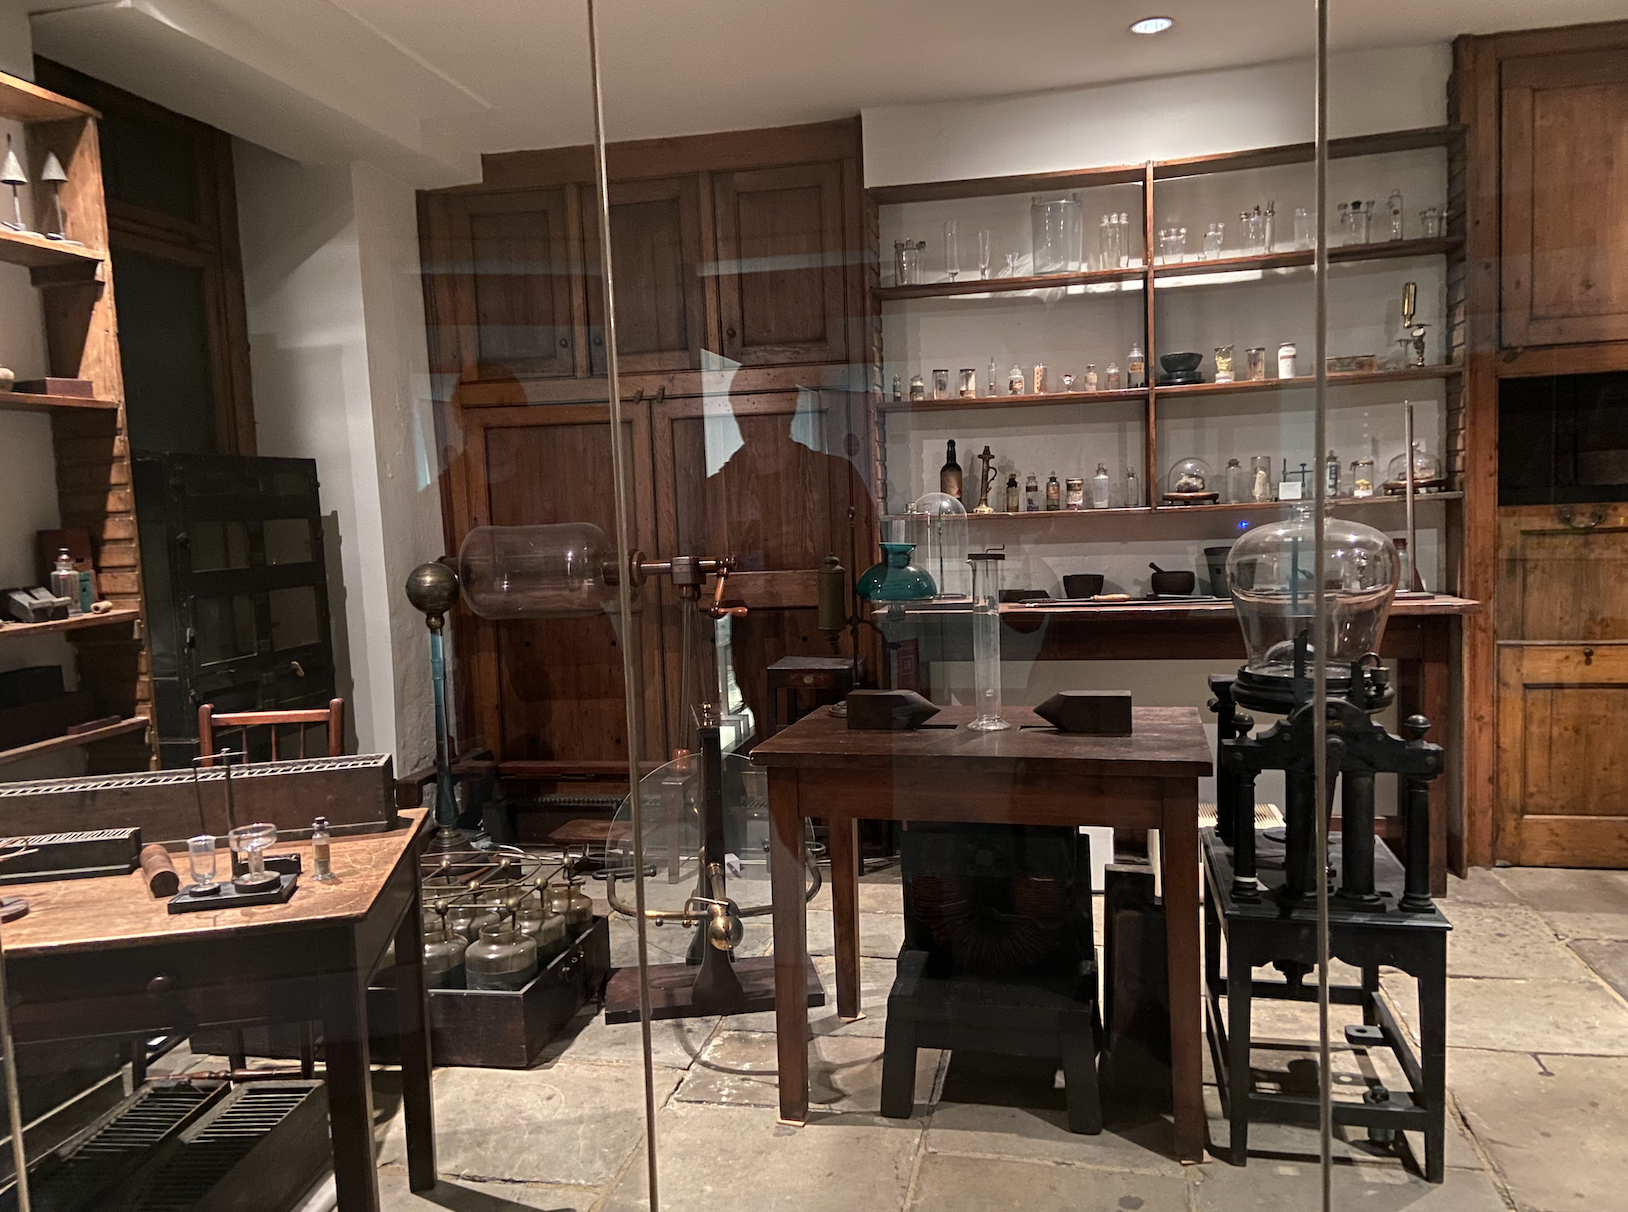 A lab with white walls behind panes of glass, grey stone flooring, two wooden tables, two wooden chairs, three bookshelves full of clear glass vials and bottles, two wooden doors, one circle light, a green lamp and scientific equipment scattered around